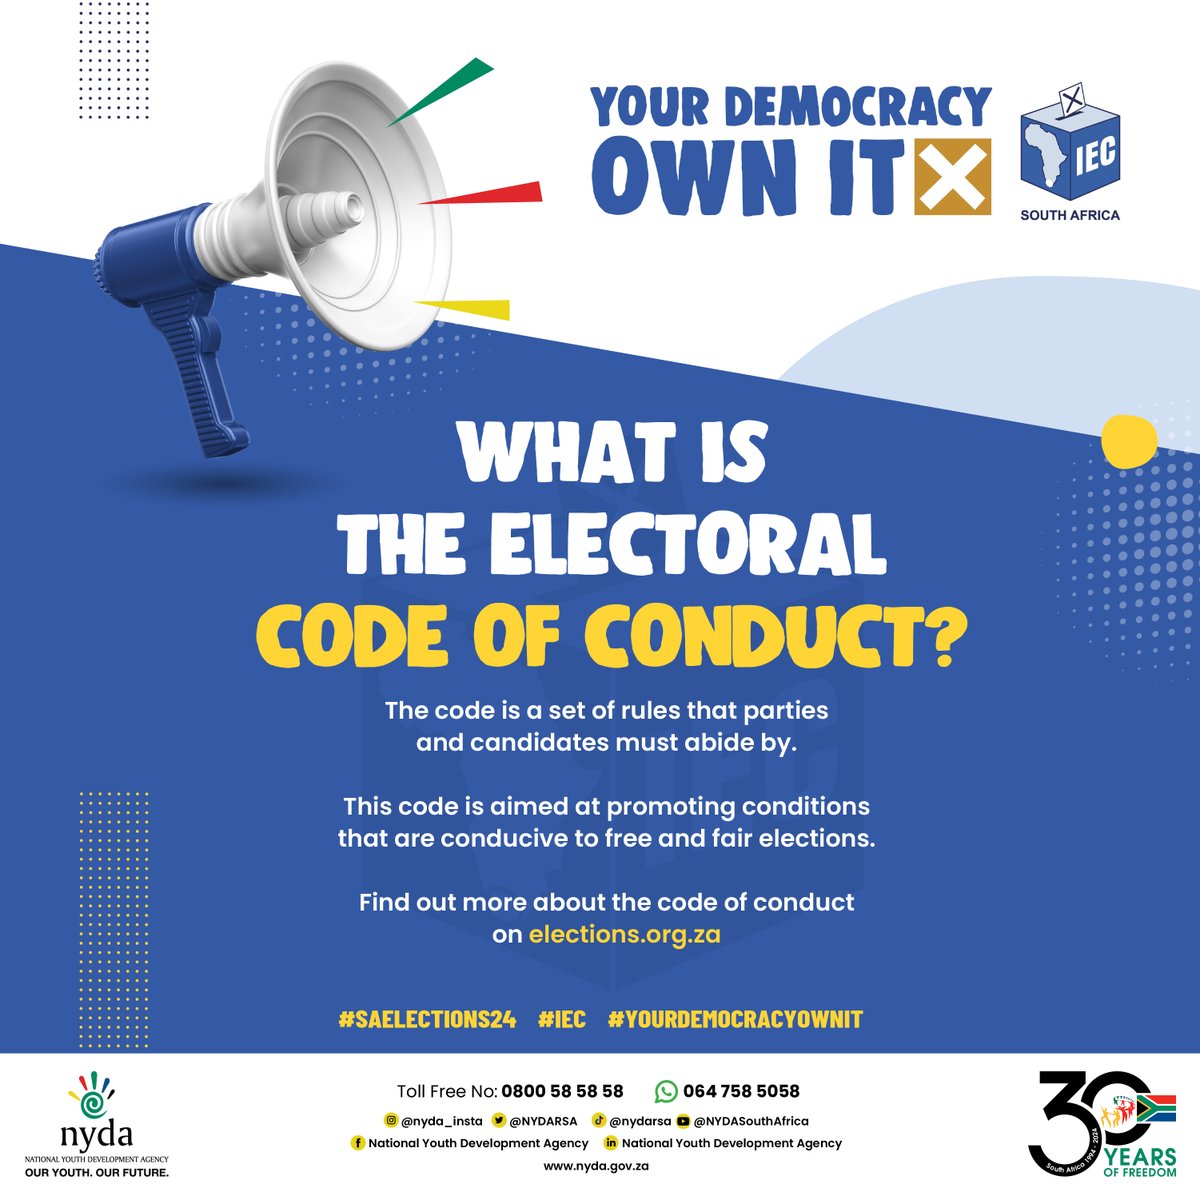 🗳️ Wondering about the electoral code of conduct? It's basically the rulebook for parties and candidates during elections, ensuring fairness and transparency. Check out more details on elections.org.za! Let's keep our elections free and fair! #ElectionEthics